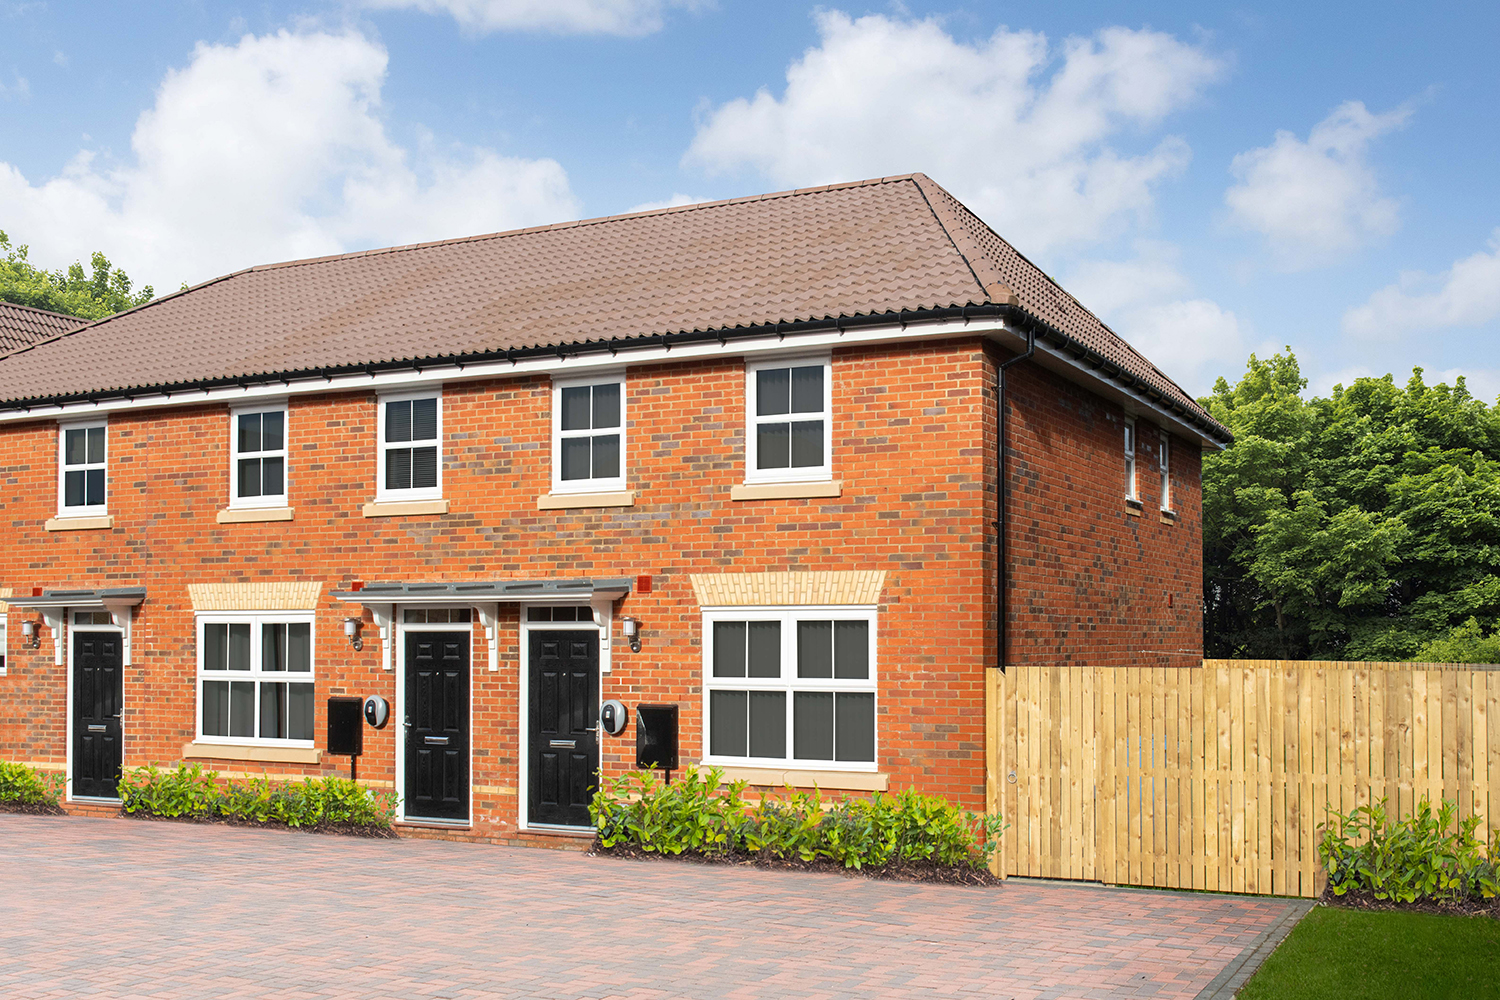 Property 2 of 10. The Archford At Minster View, Beverley